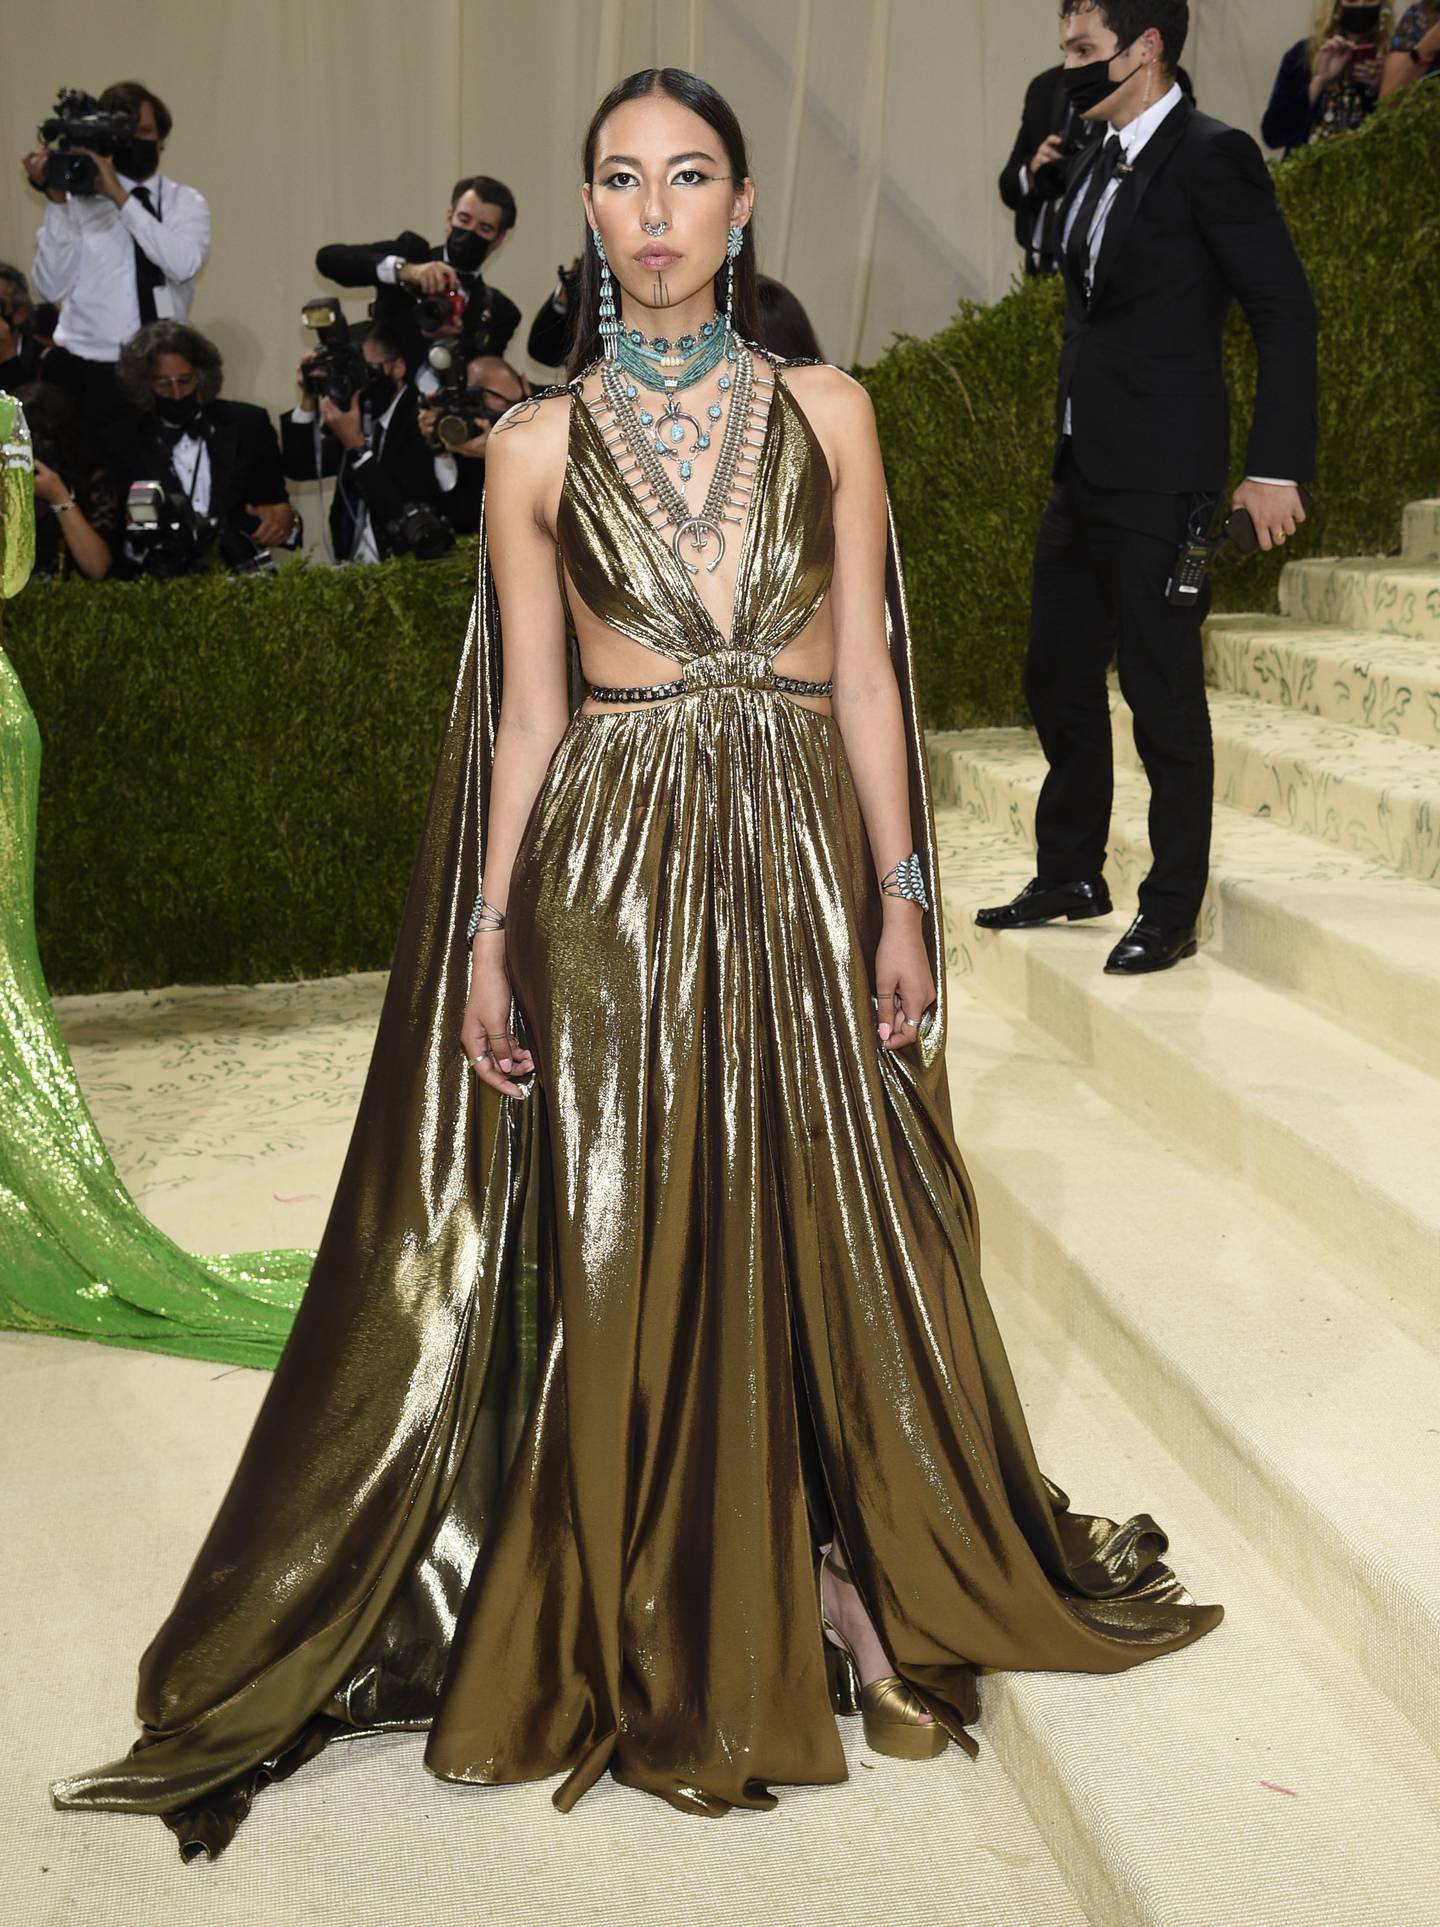 Quannah Chasinghorse at the Met Gala 2021 in gold 